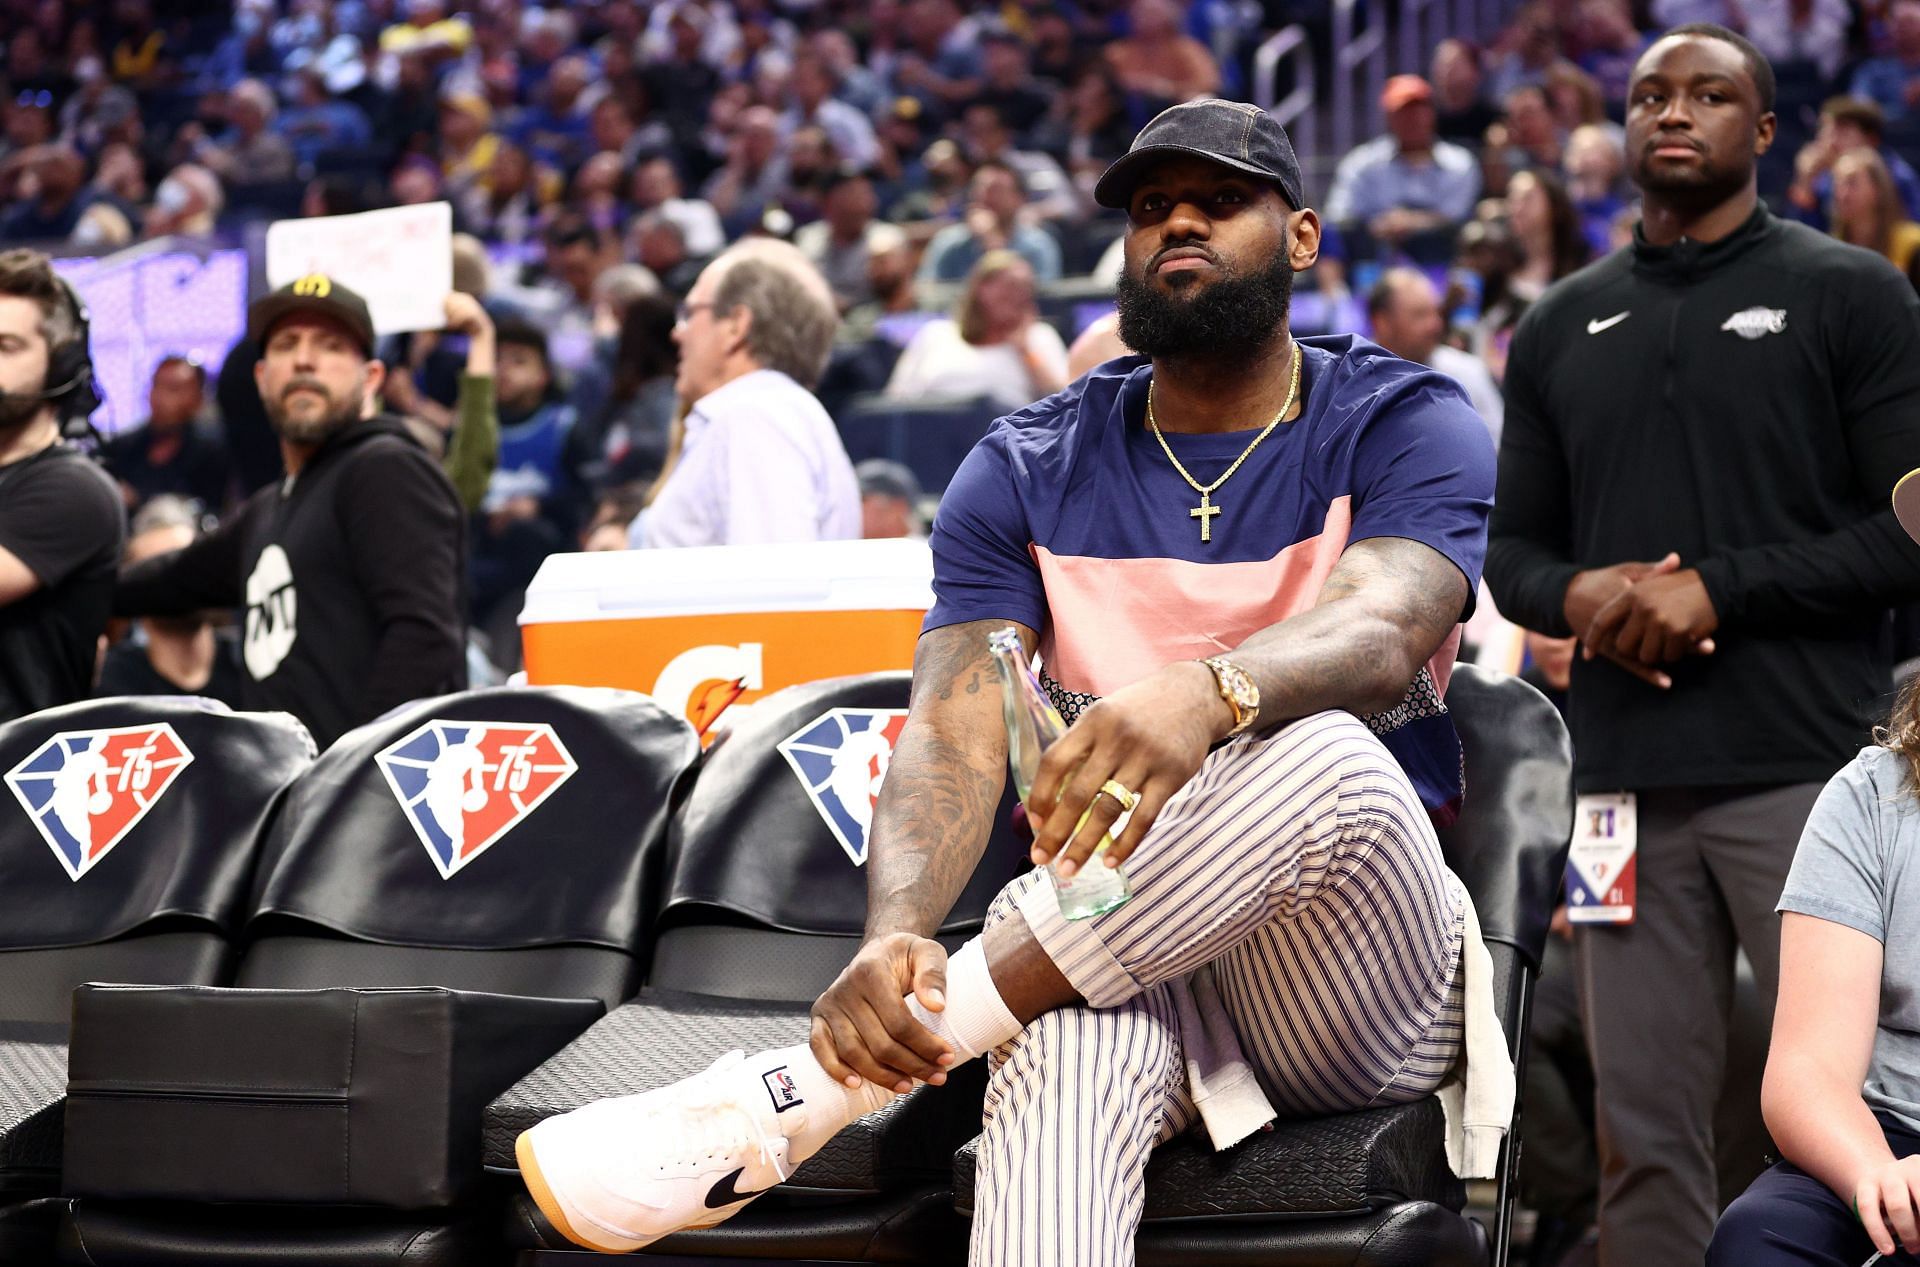 Injured LeBron James on the bench, as the LA Lakers face-off against the Warriors